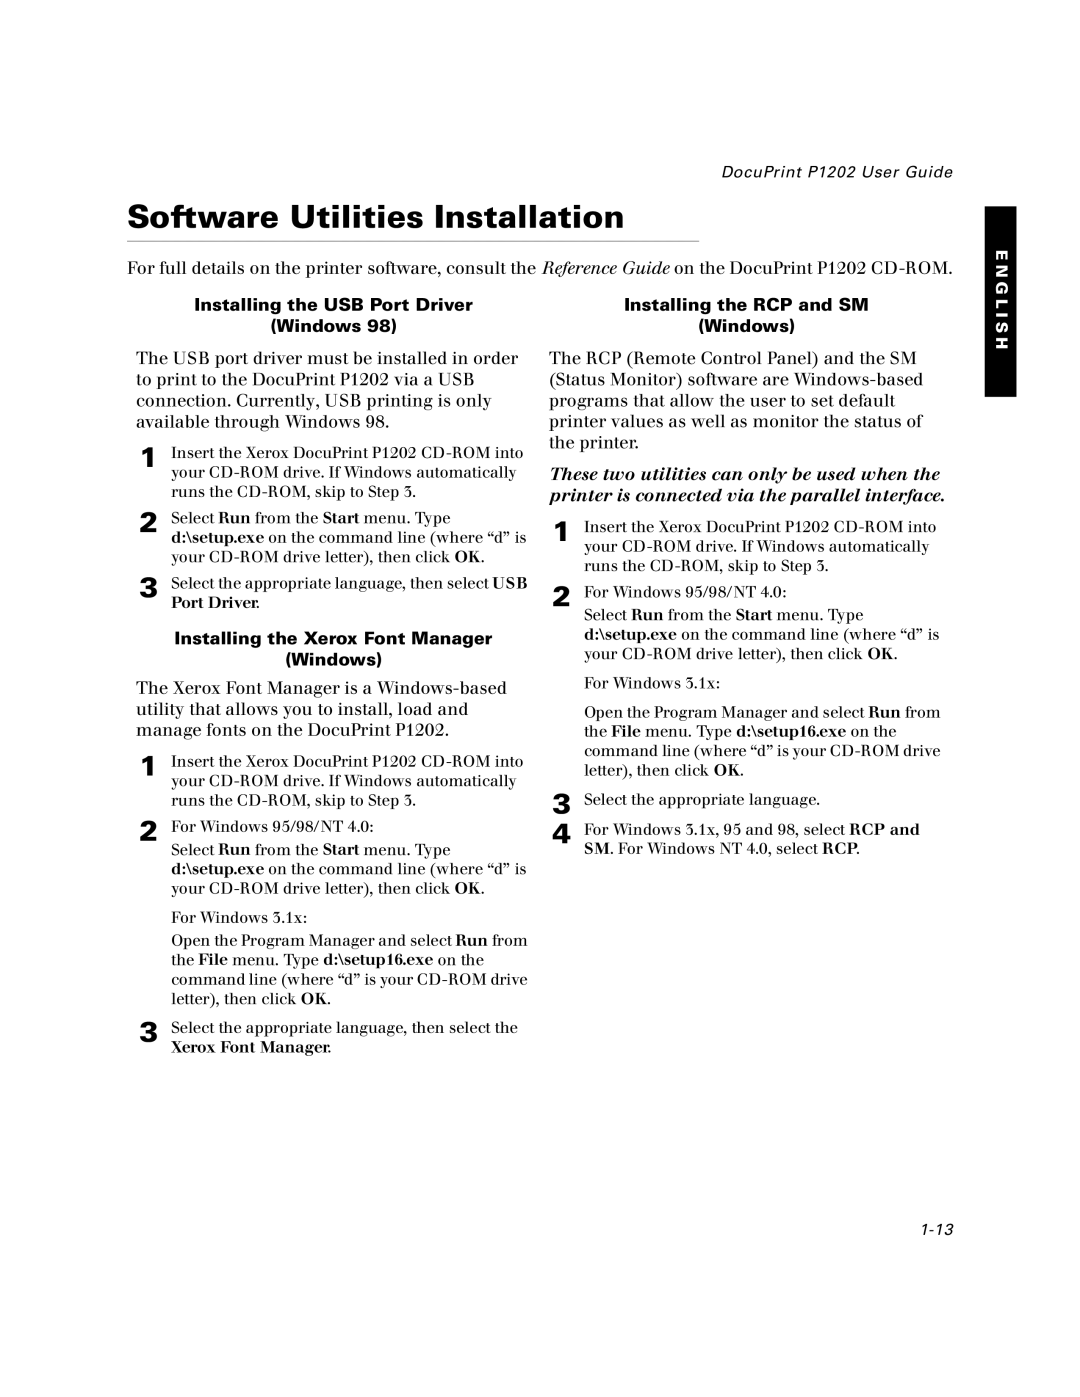 Xerox P1202 specifications Software Utilities Installation, Installing the Xerox Font Manager Windows 